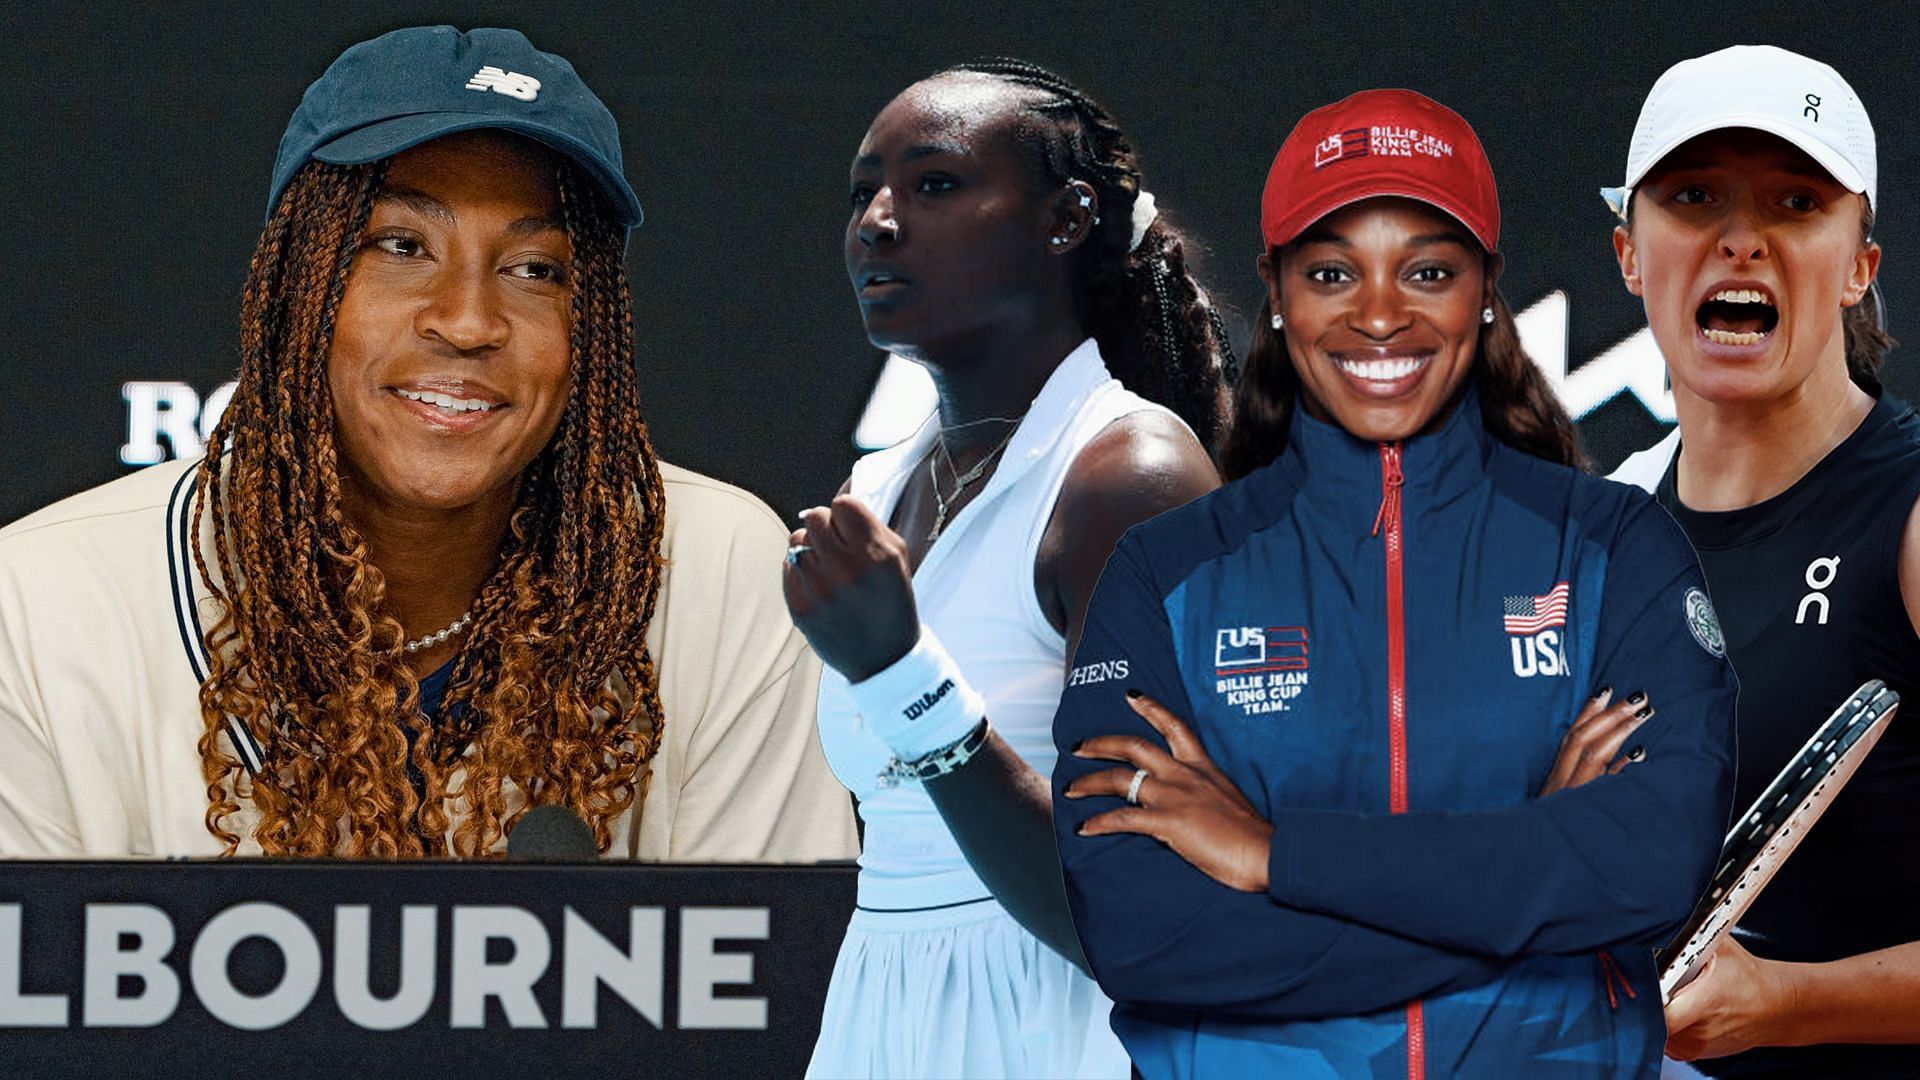 Coco Gauff, Alycia Parks, Sloane Stephens and Iga Swiatek (from left to right)